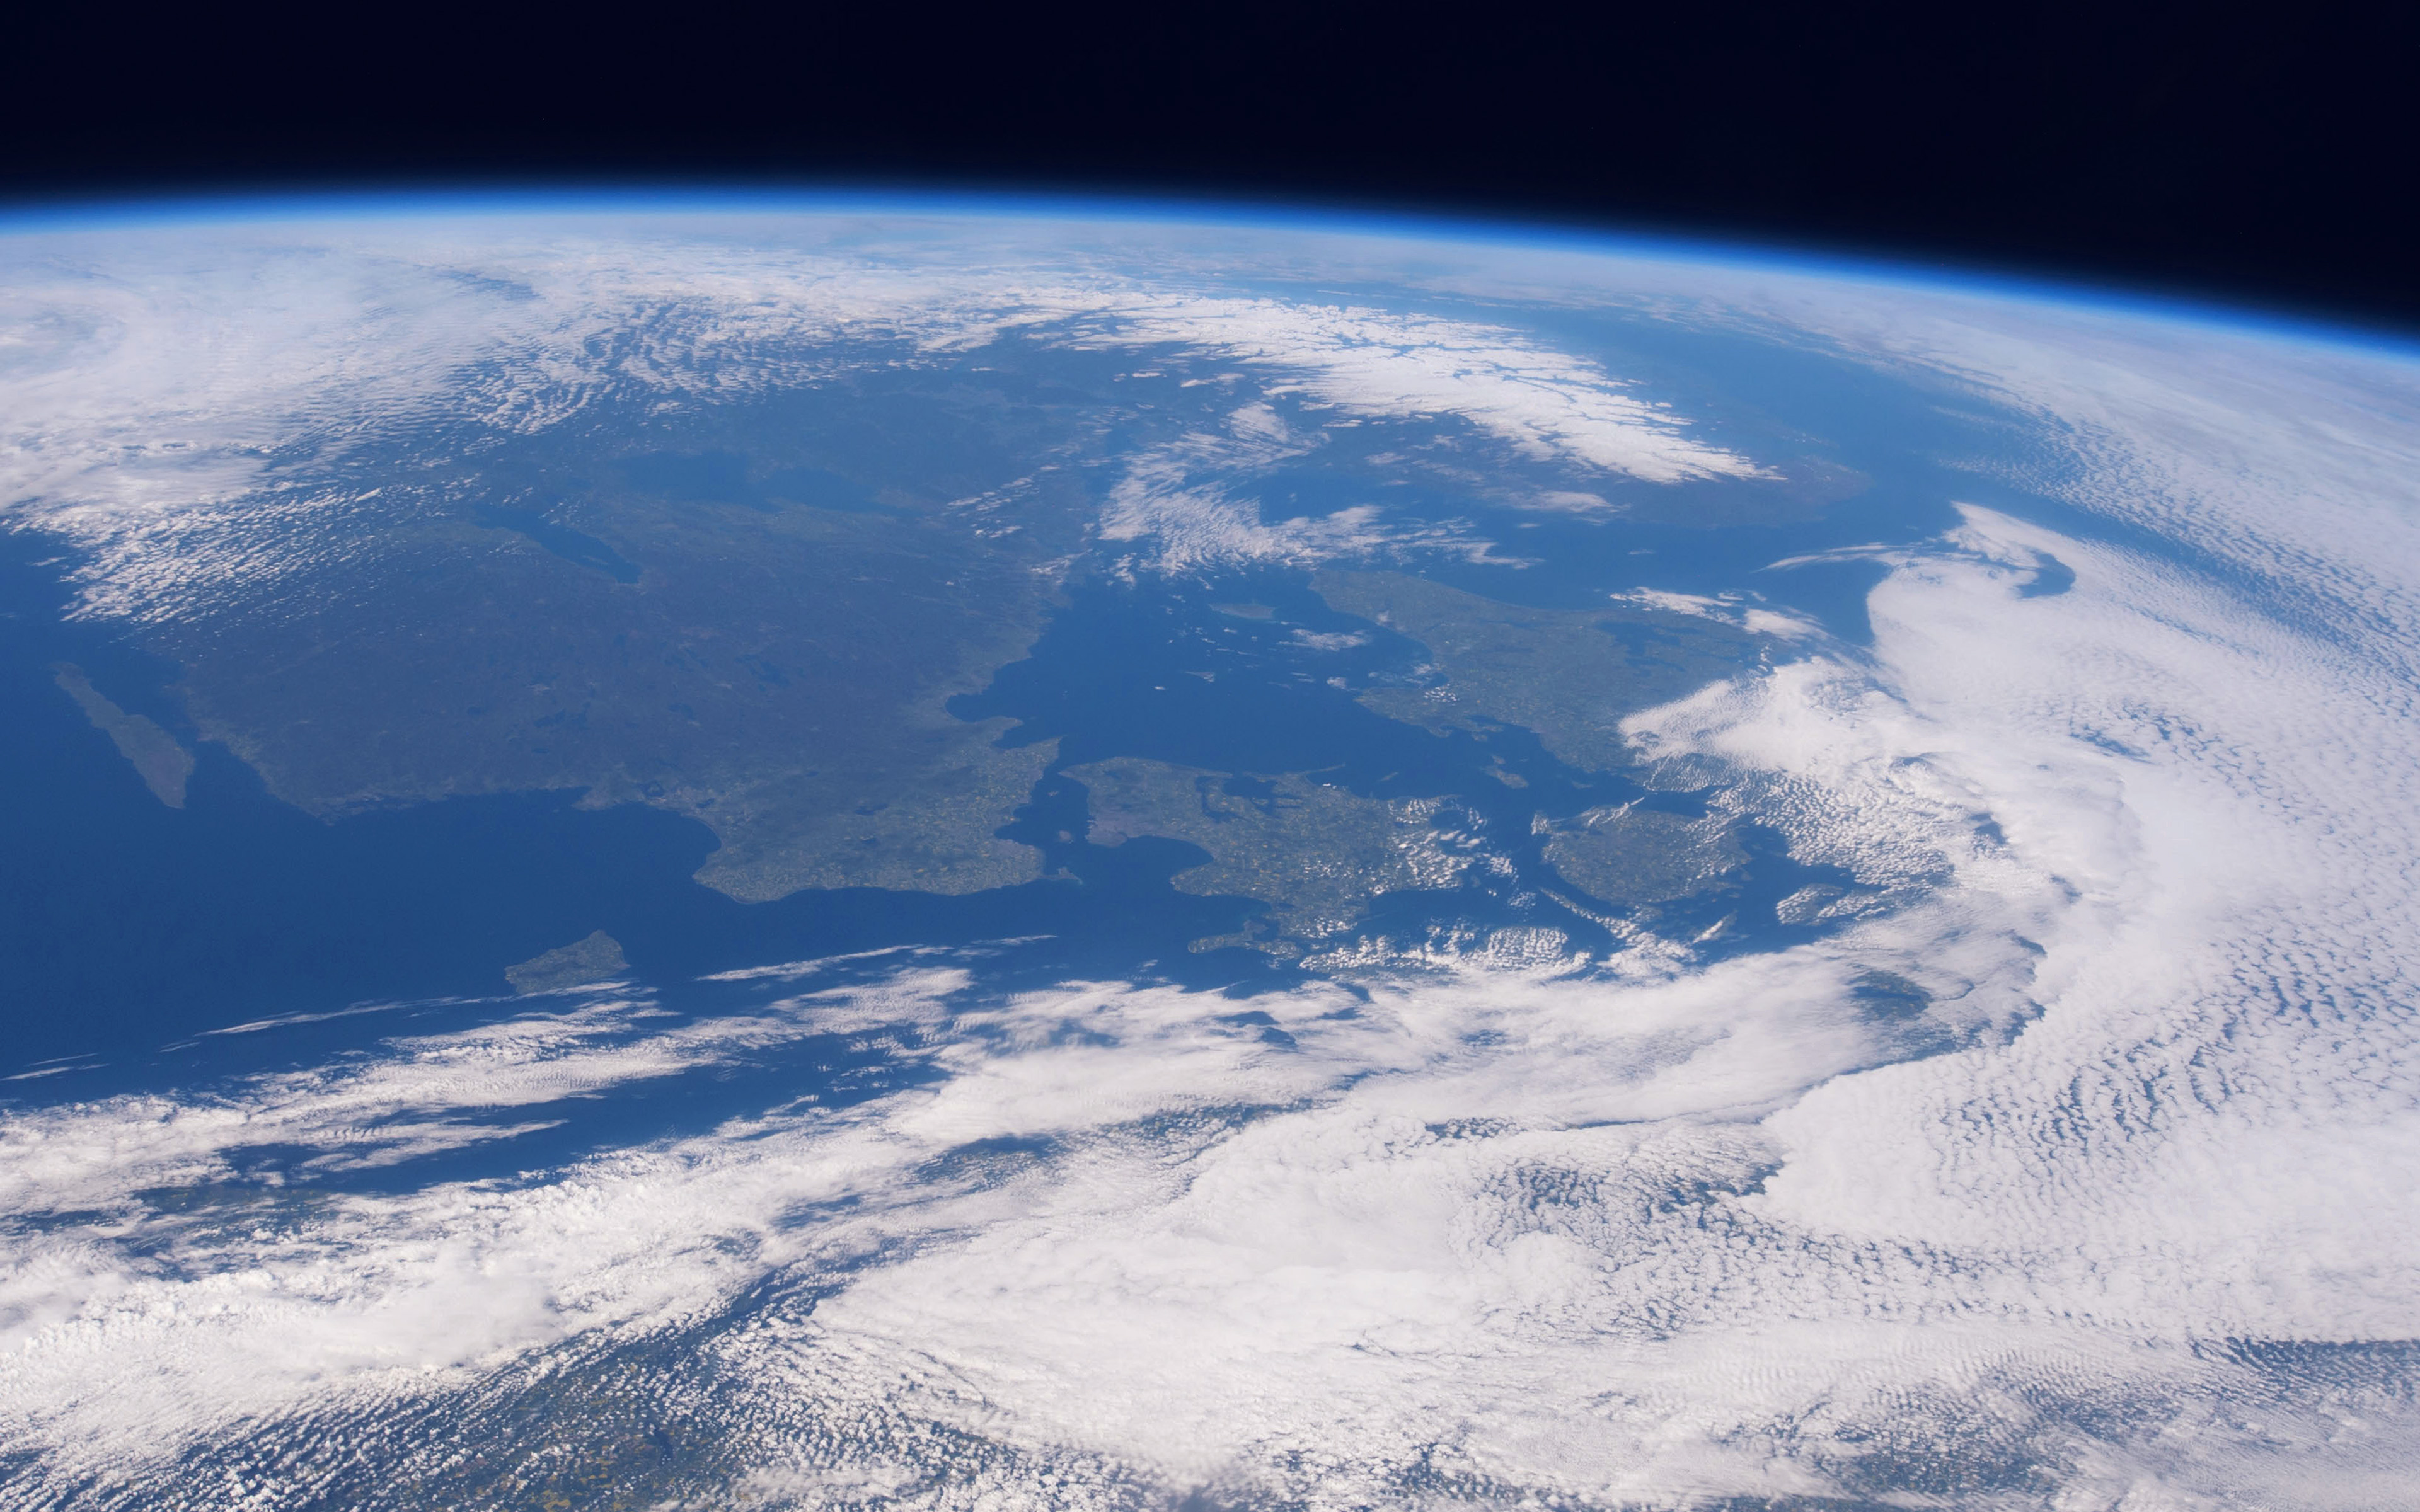 wallpaper for desktop, laptop. blue planet earth from space nature